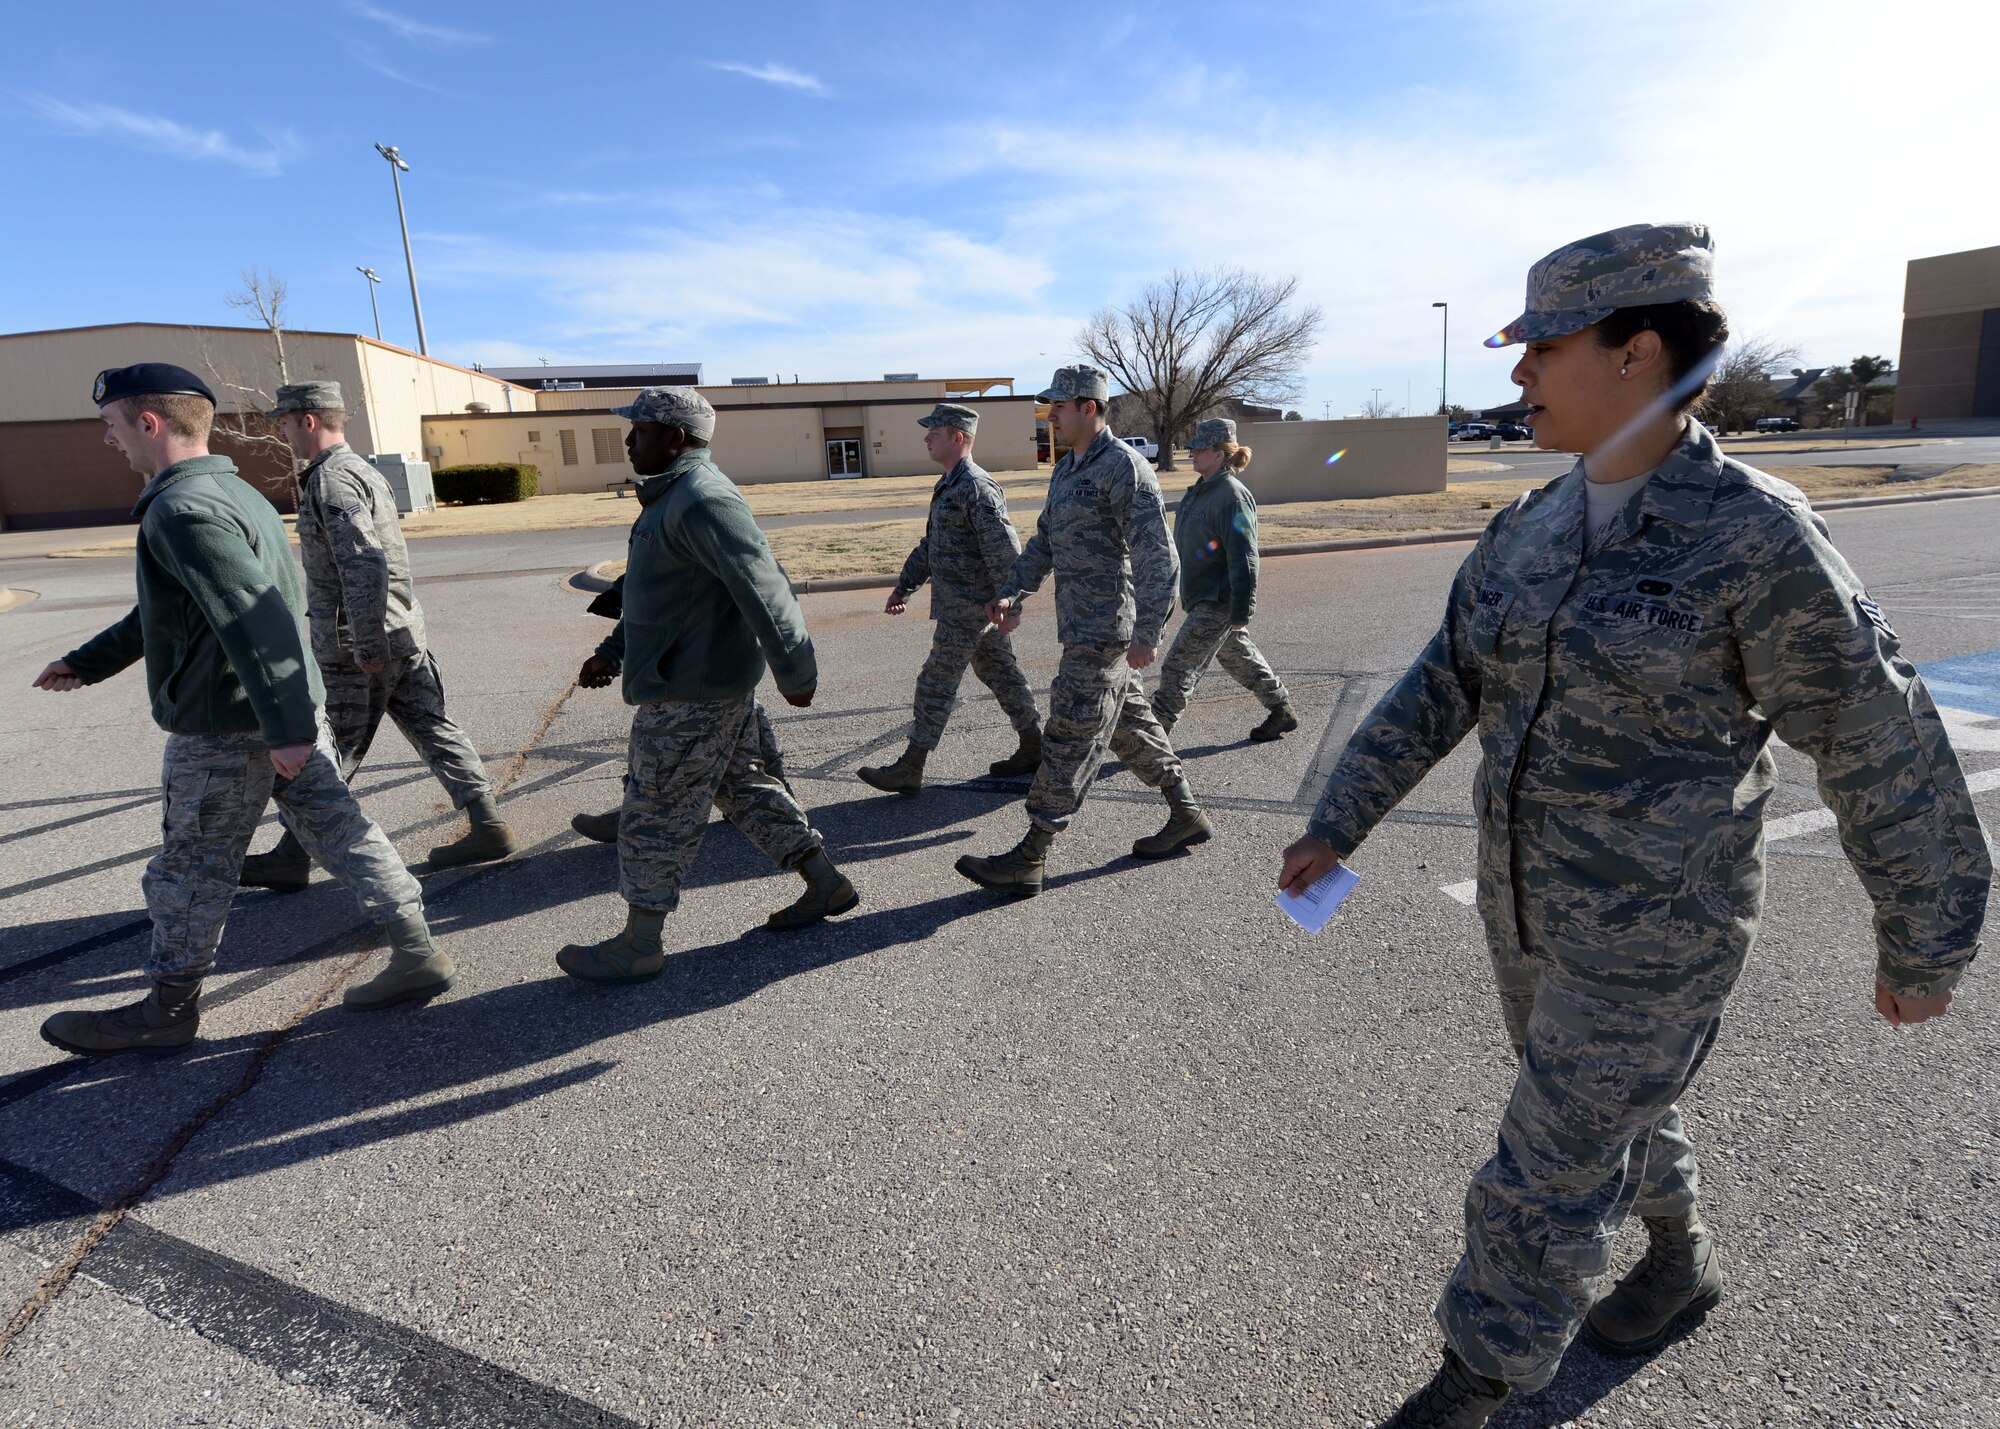 ALTUS AIR FORCE BASE, Okla. – U.S. Air Force Senior Airman Mariah Hullinger, 452nd Logistics Readiness Squadron, marches a formation at the Airman Leadership School parade training area Jan. 15, 2014. Hullinger traveled from March Air Reserve Base, Calif. Airmen spend five weeks developing leadership abilities and learning to become effective communicators. (U.S. Air Force photo by Senior Airman Levin Boland/Released)